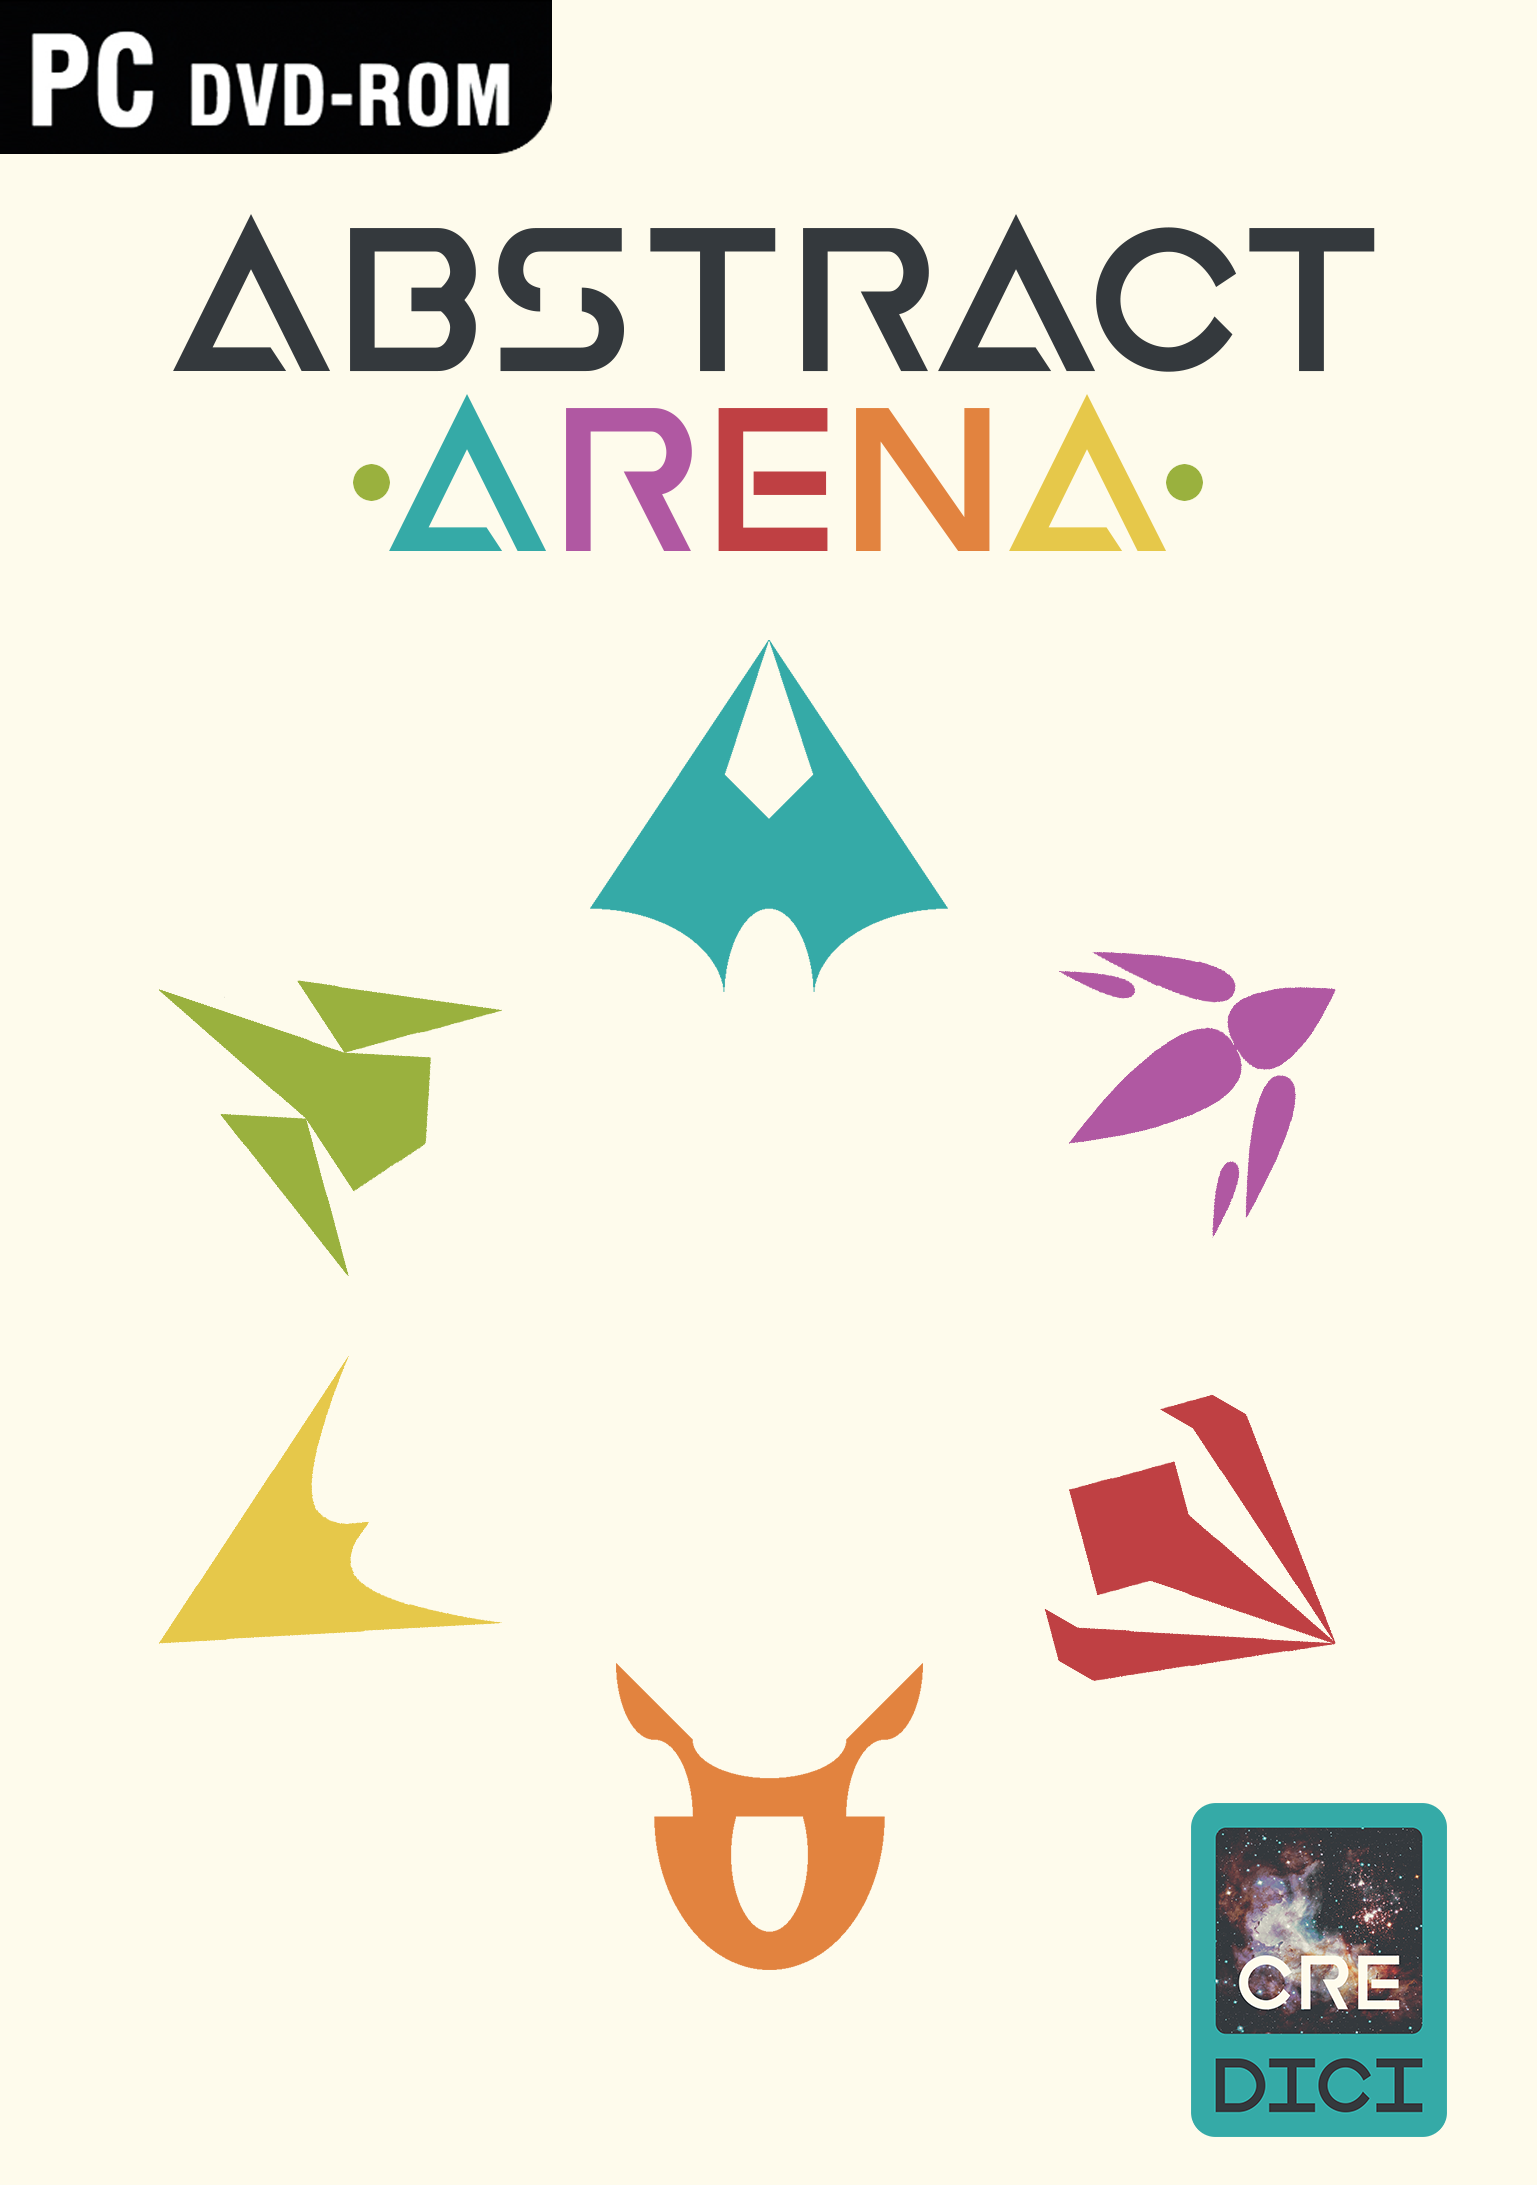 Image of Abstract Arena